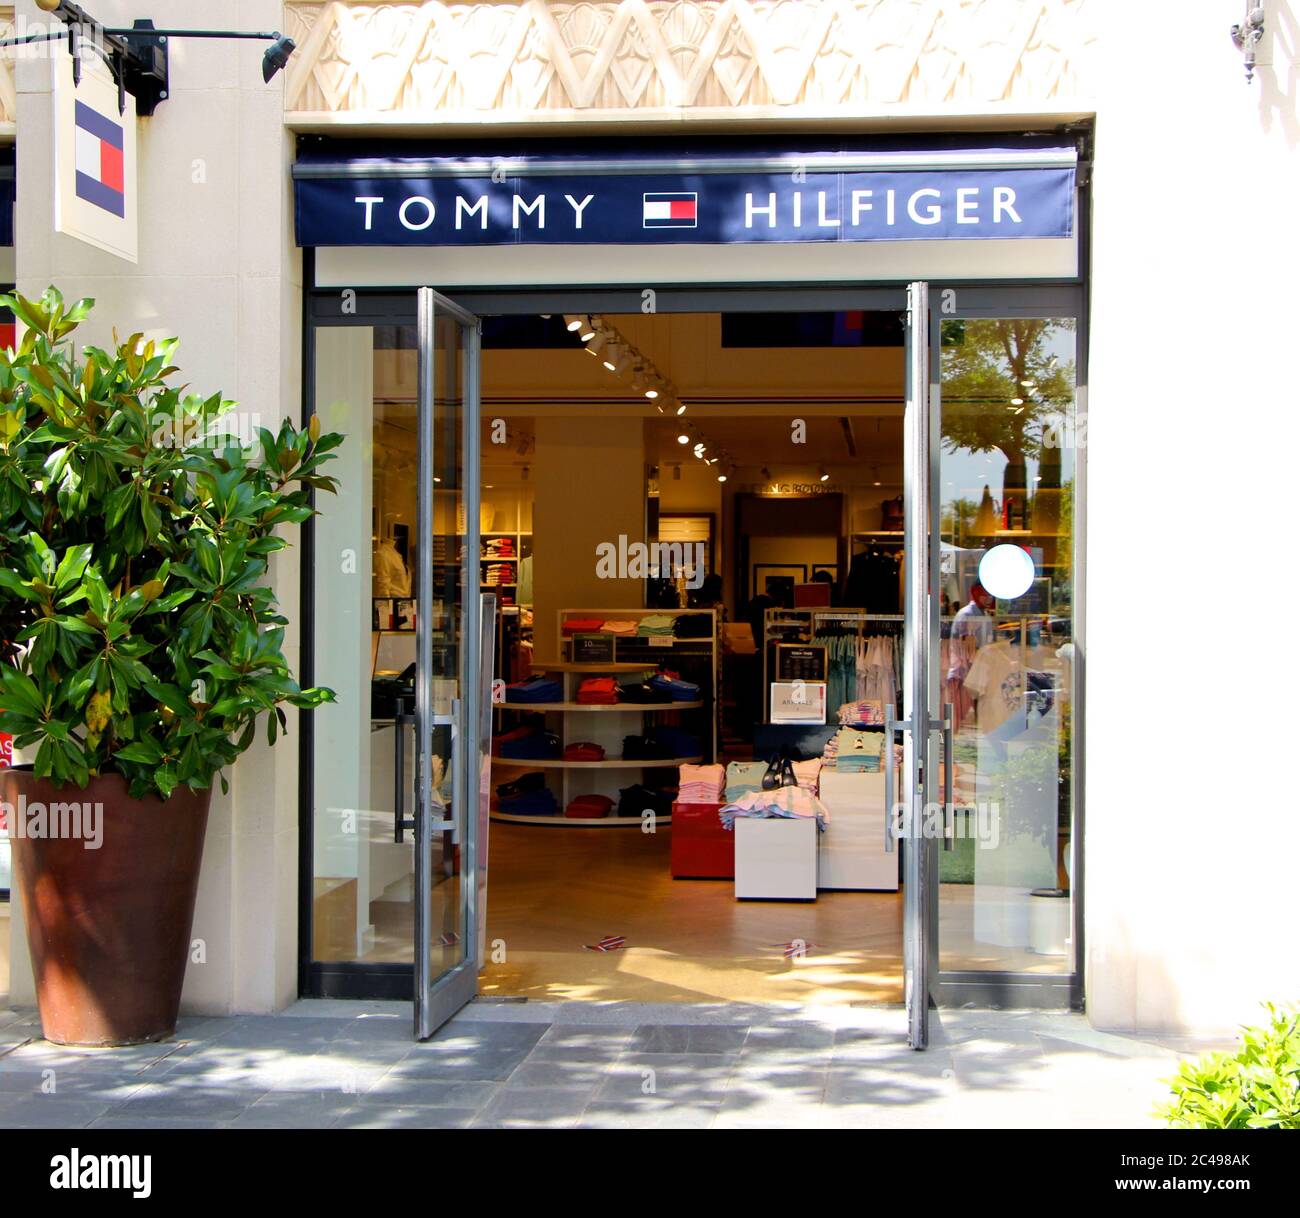 Tommy Hilfiger Shop High Resolution Stock Photography and Images - Alamy